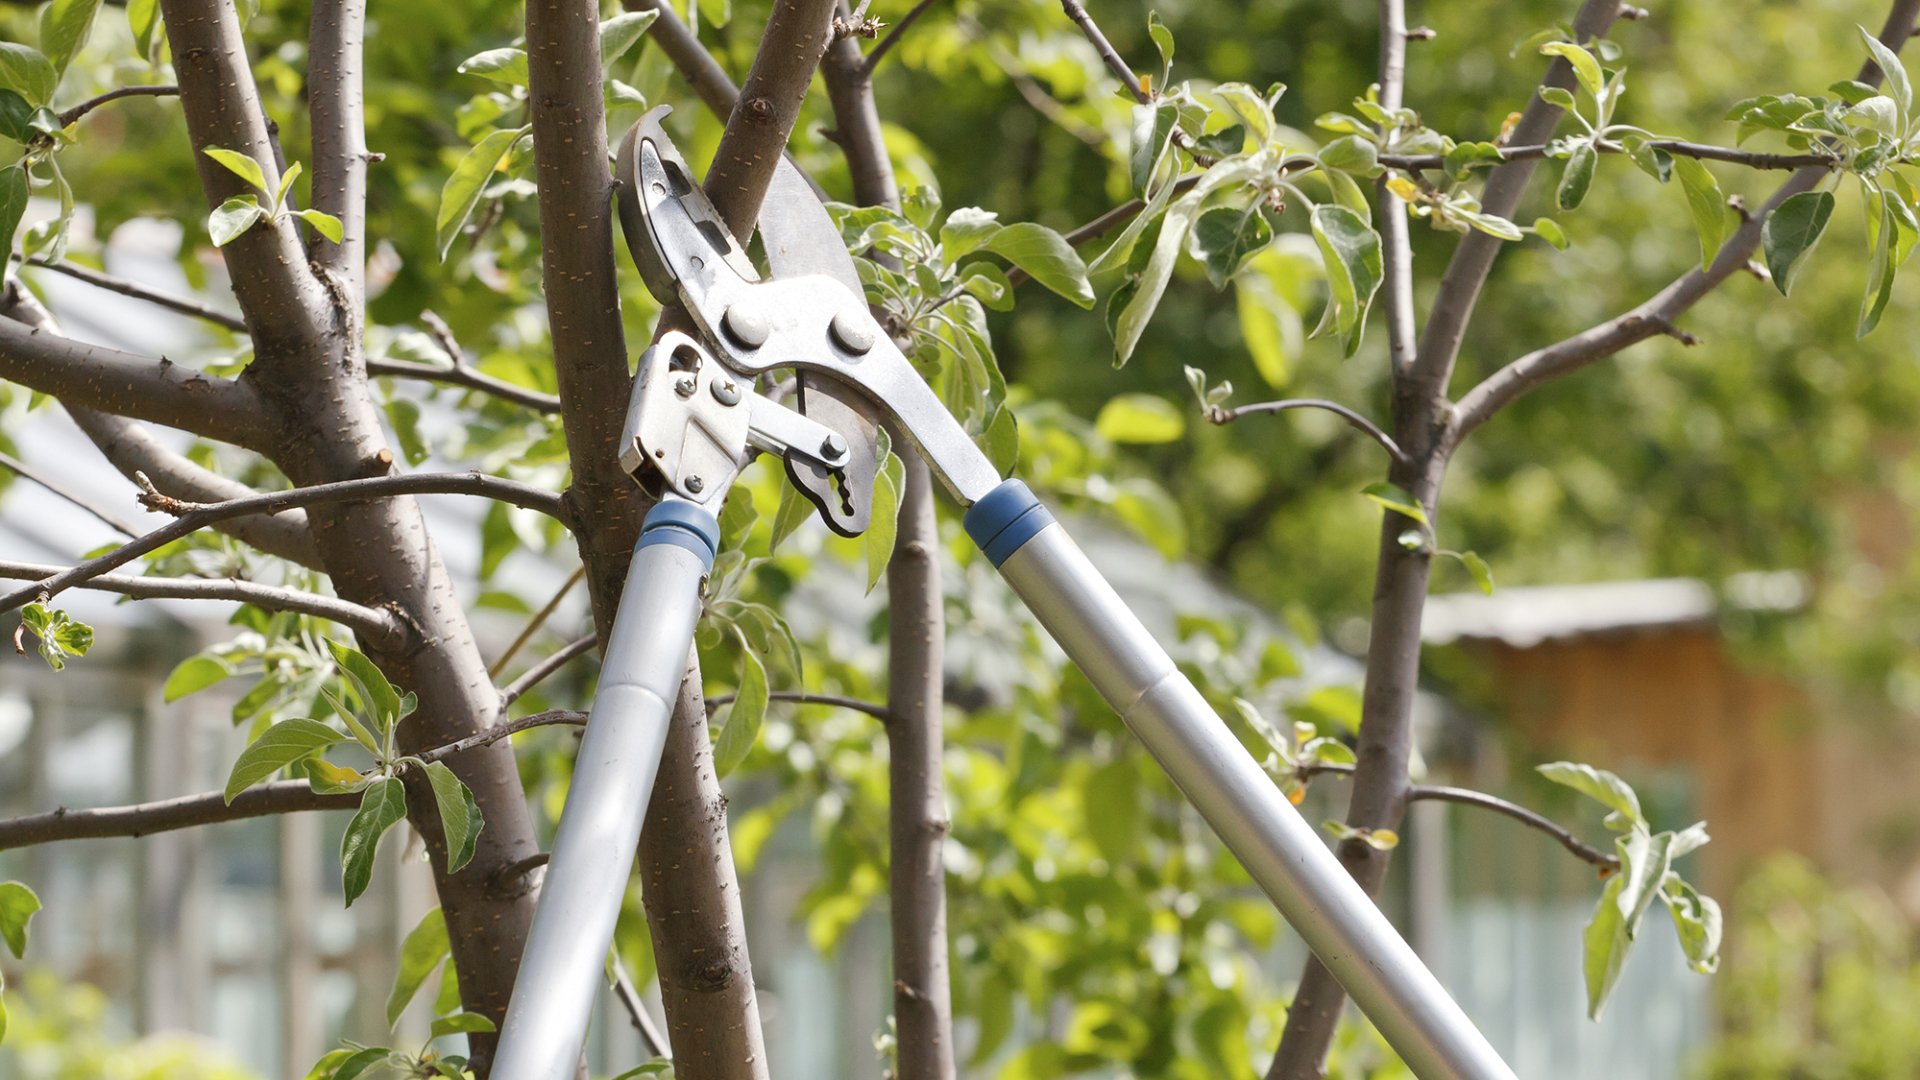 Common Mistakes to Avoid When Trimming Fruit Trees